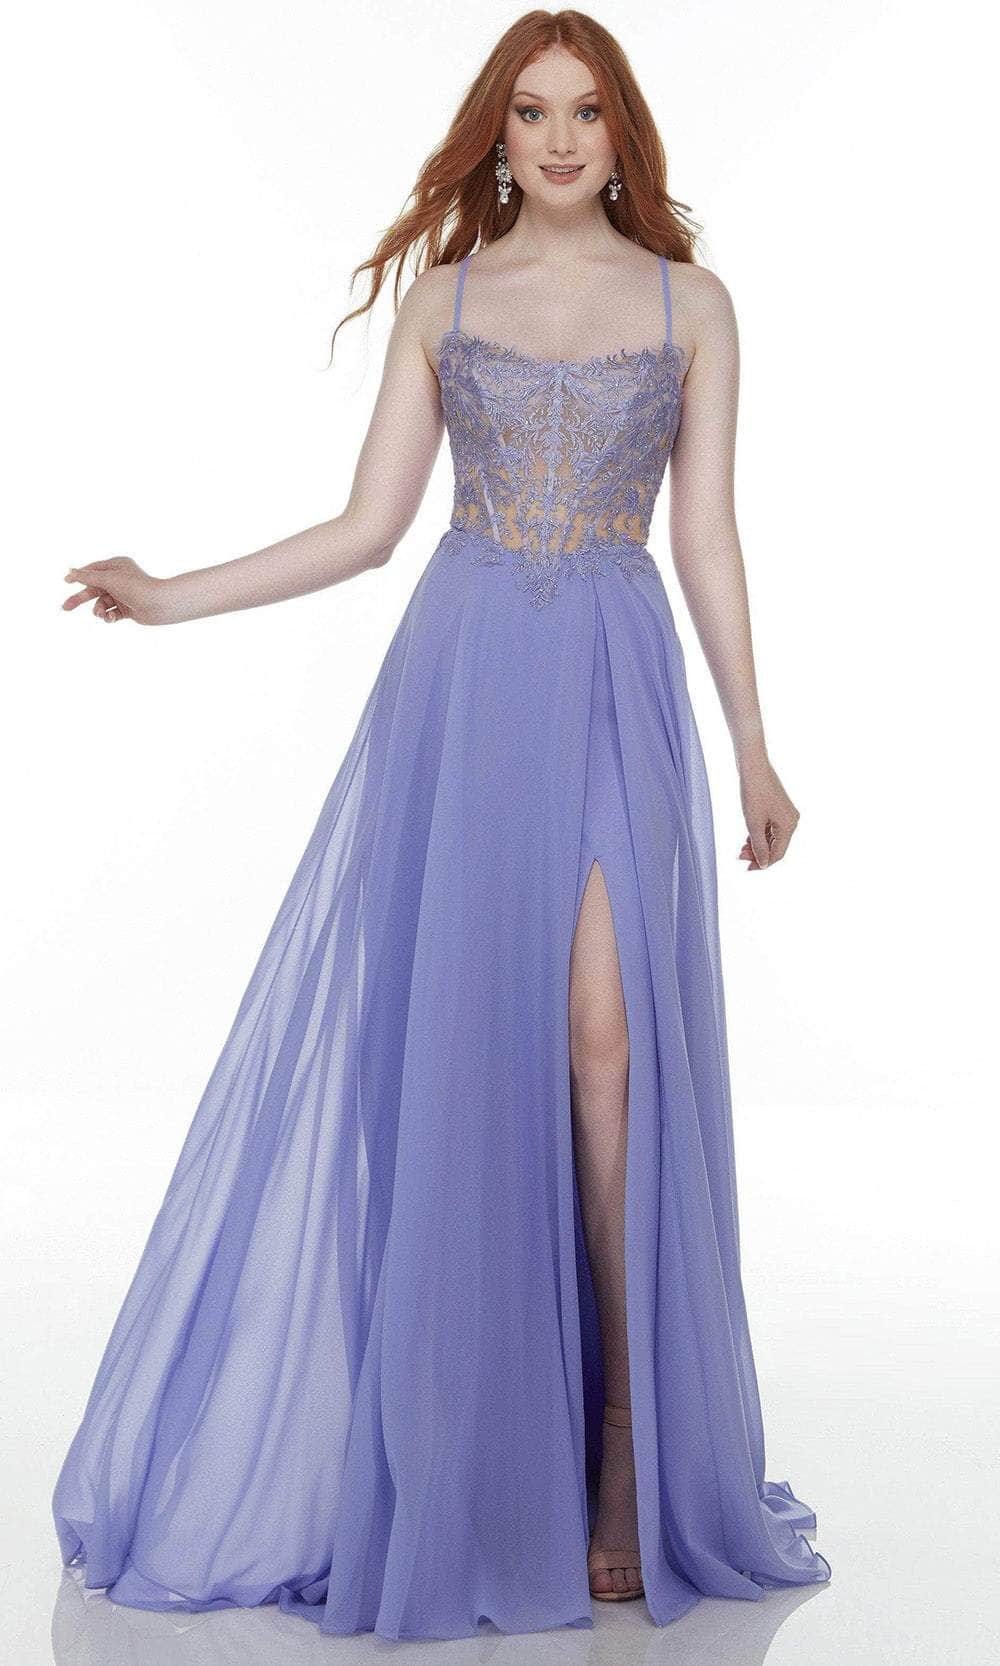 Alyce Paris 61198 - Scoop Neck High Slit Prom Gown Special Occasion Dress 000 / Blue Iris